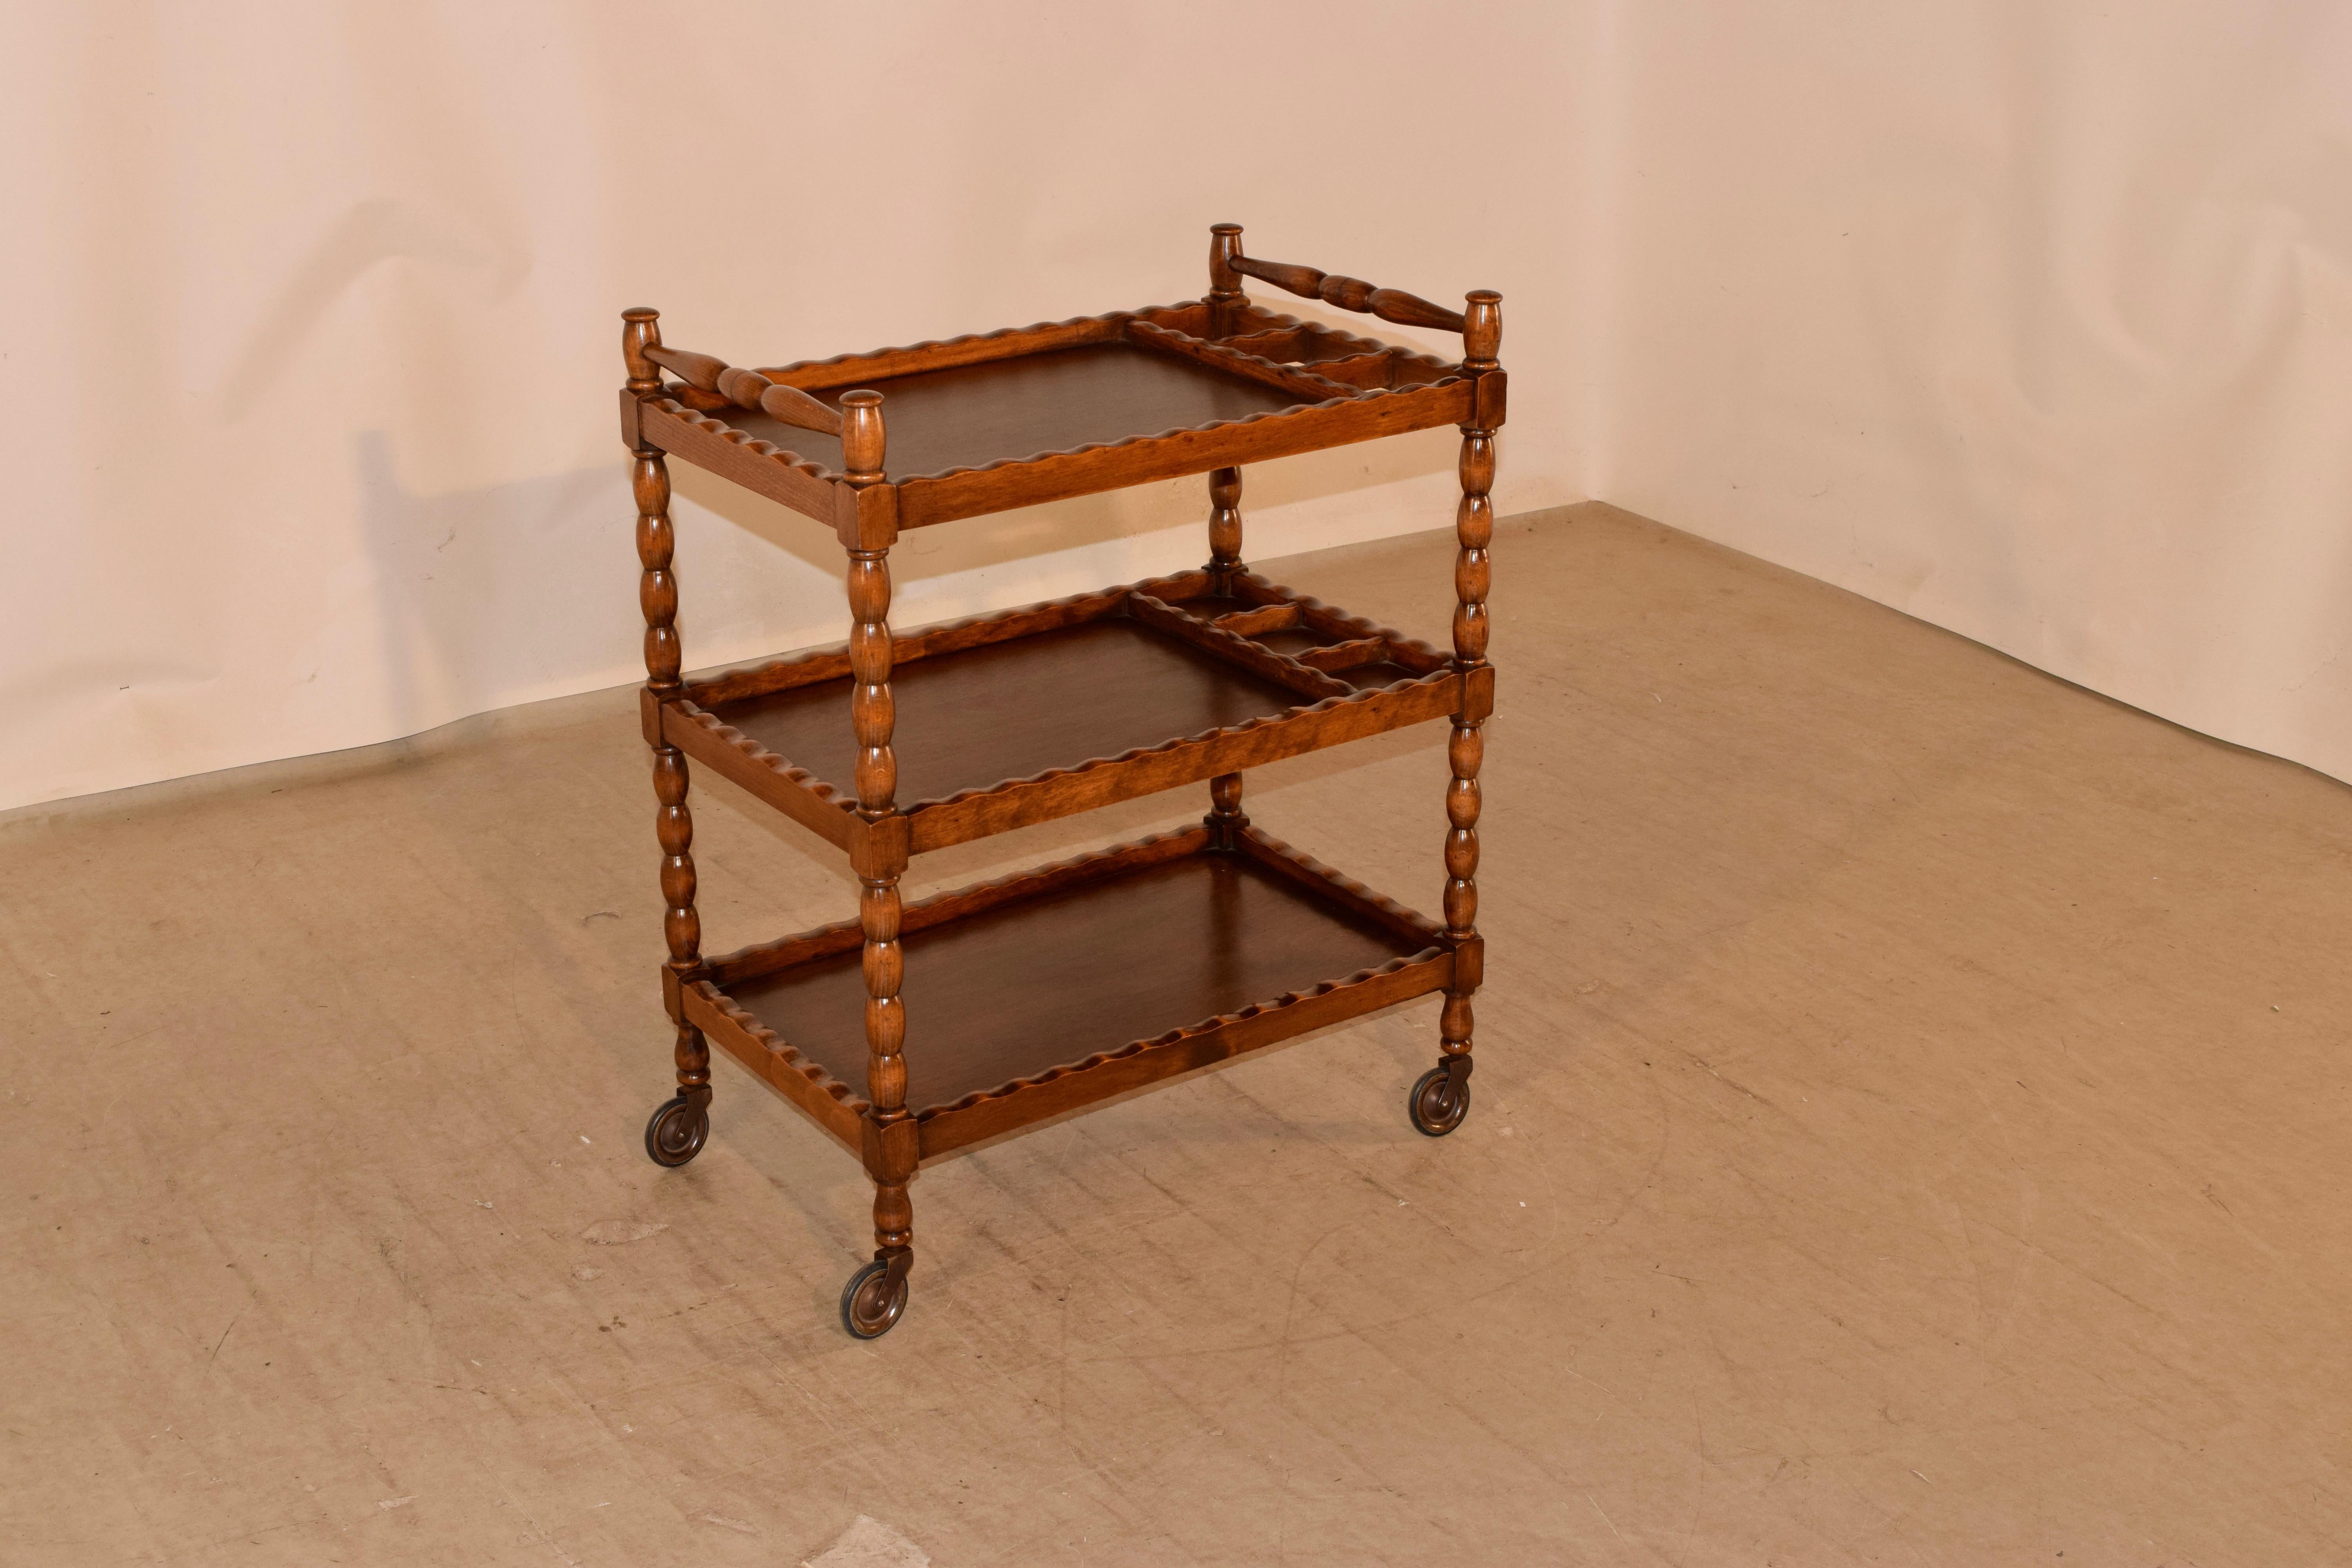 C. 1900 English oak drinks cart with turned handles over three shelves which have scalloped galleries and hand turned shelf supports and feet. The cart is supported on what appear to be the original casters.